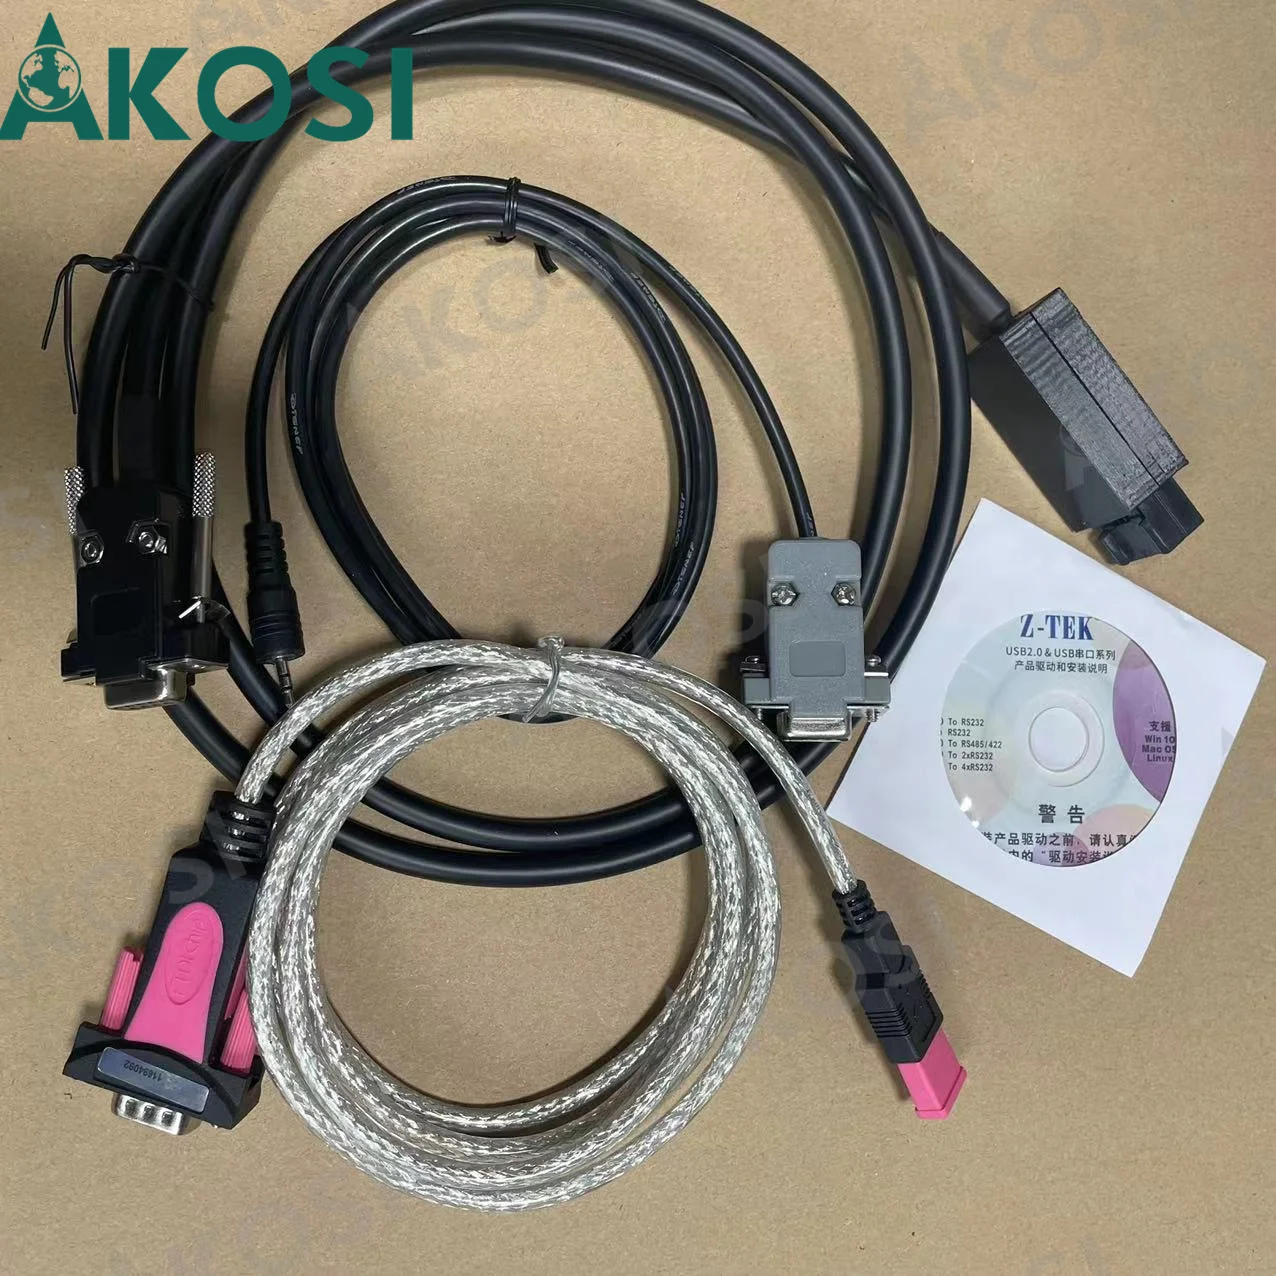 

Truck Diagnostic tool Connector Cable for Mitsubishi Diagnosis 16A68-00500 lift Truck Diagnostic scanner tool